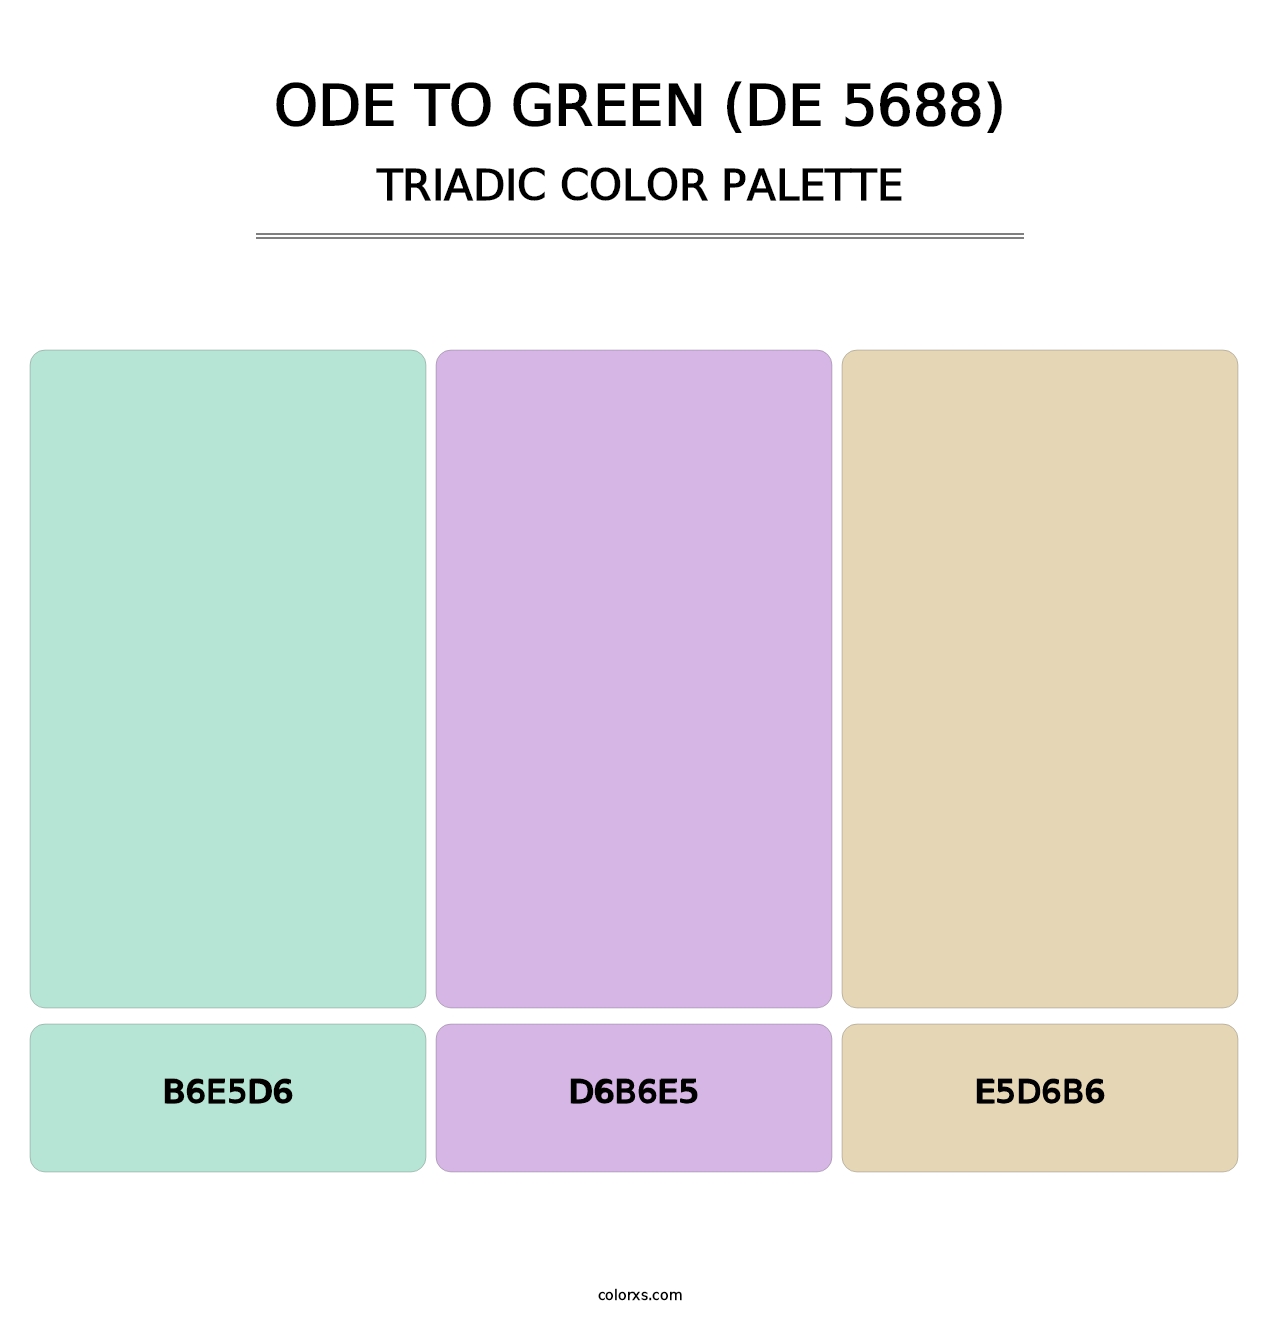 Ode to Green (DE 5688) - Triadic Color Palette